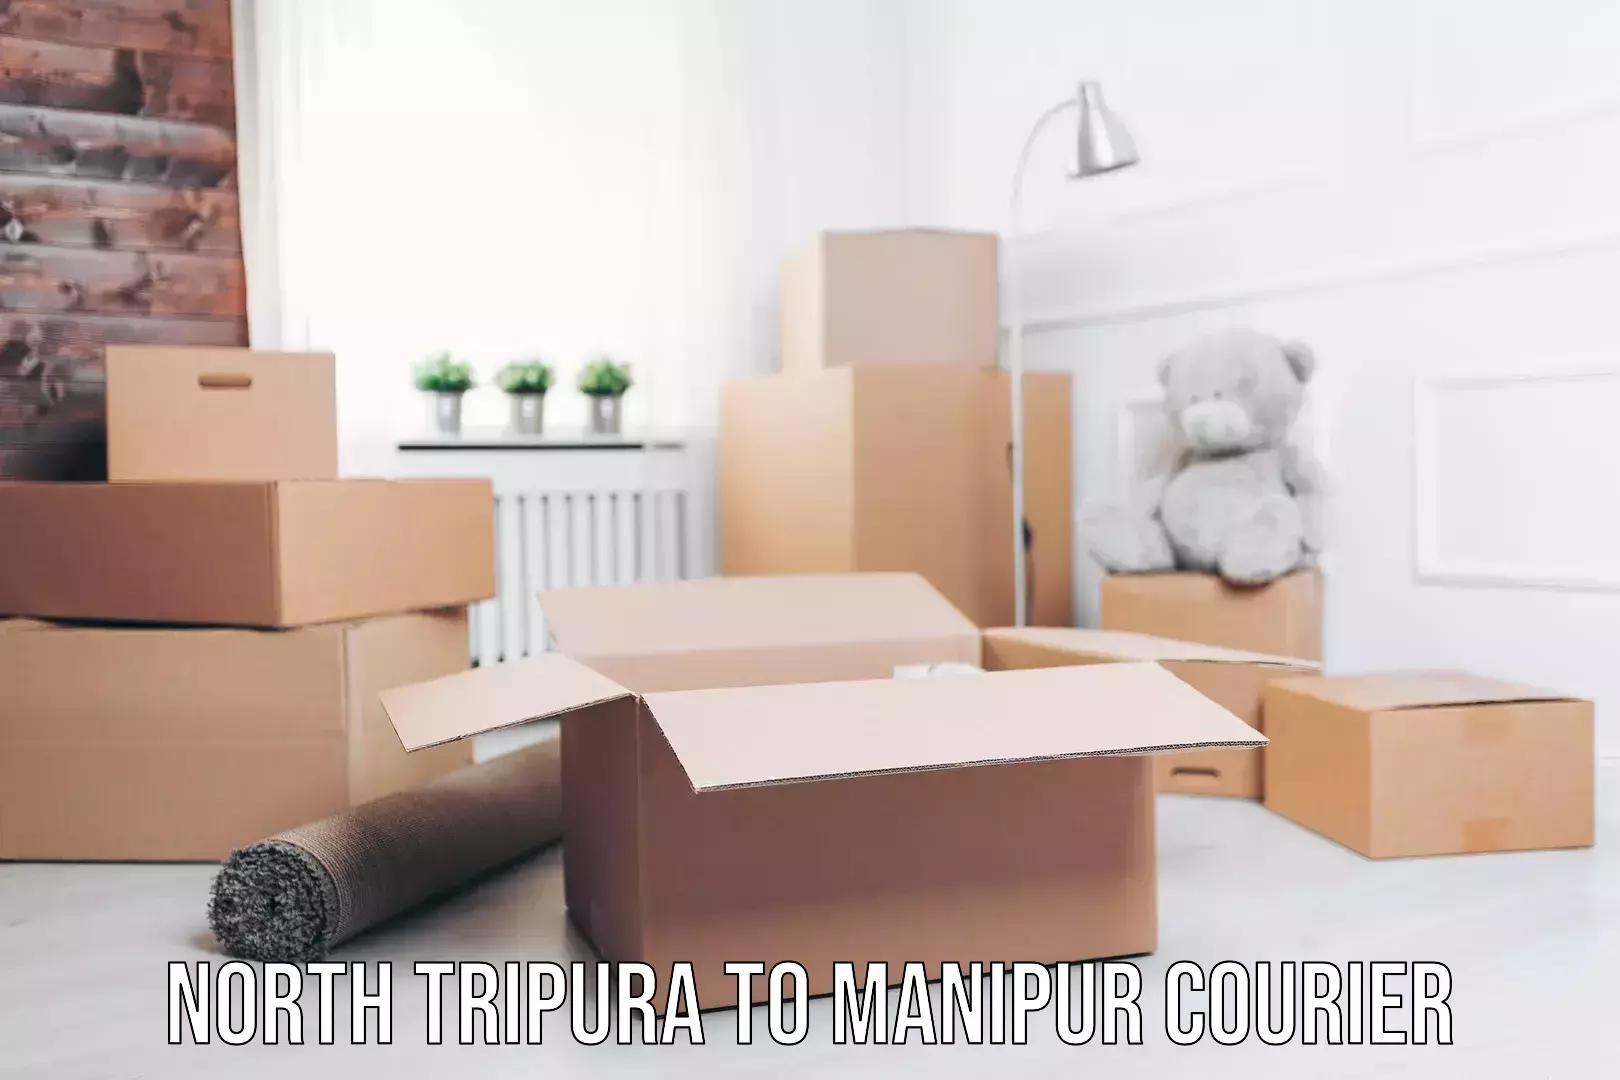 High-capacity parcel service North Tripura to Manipur